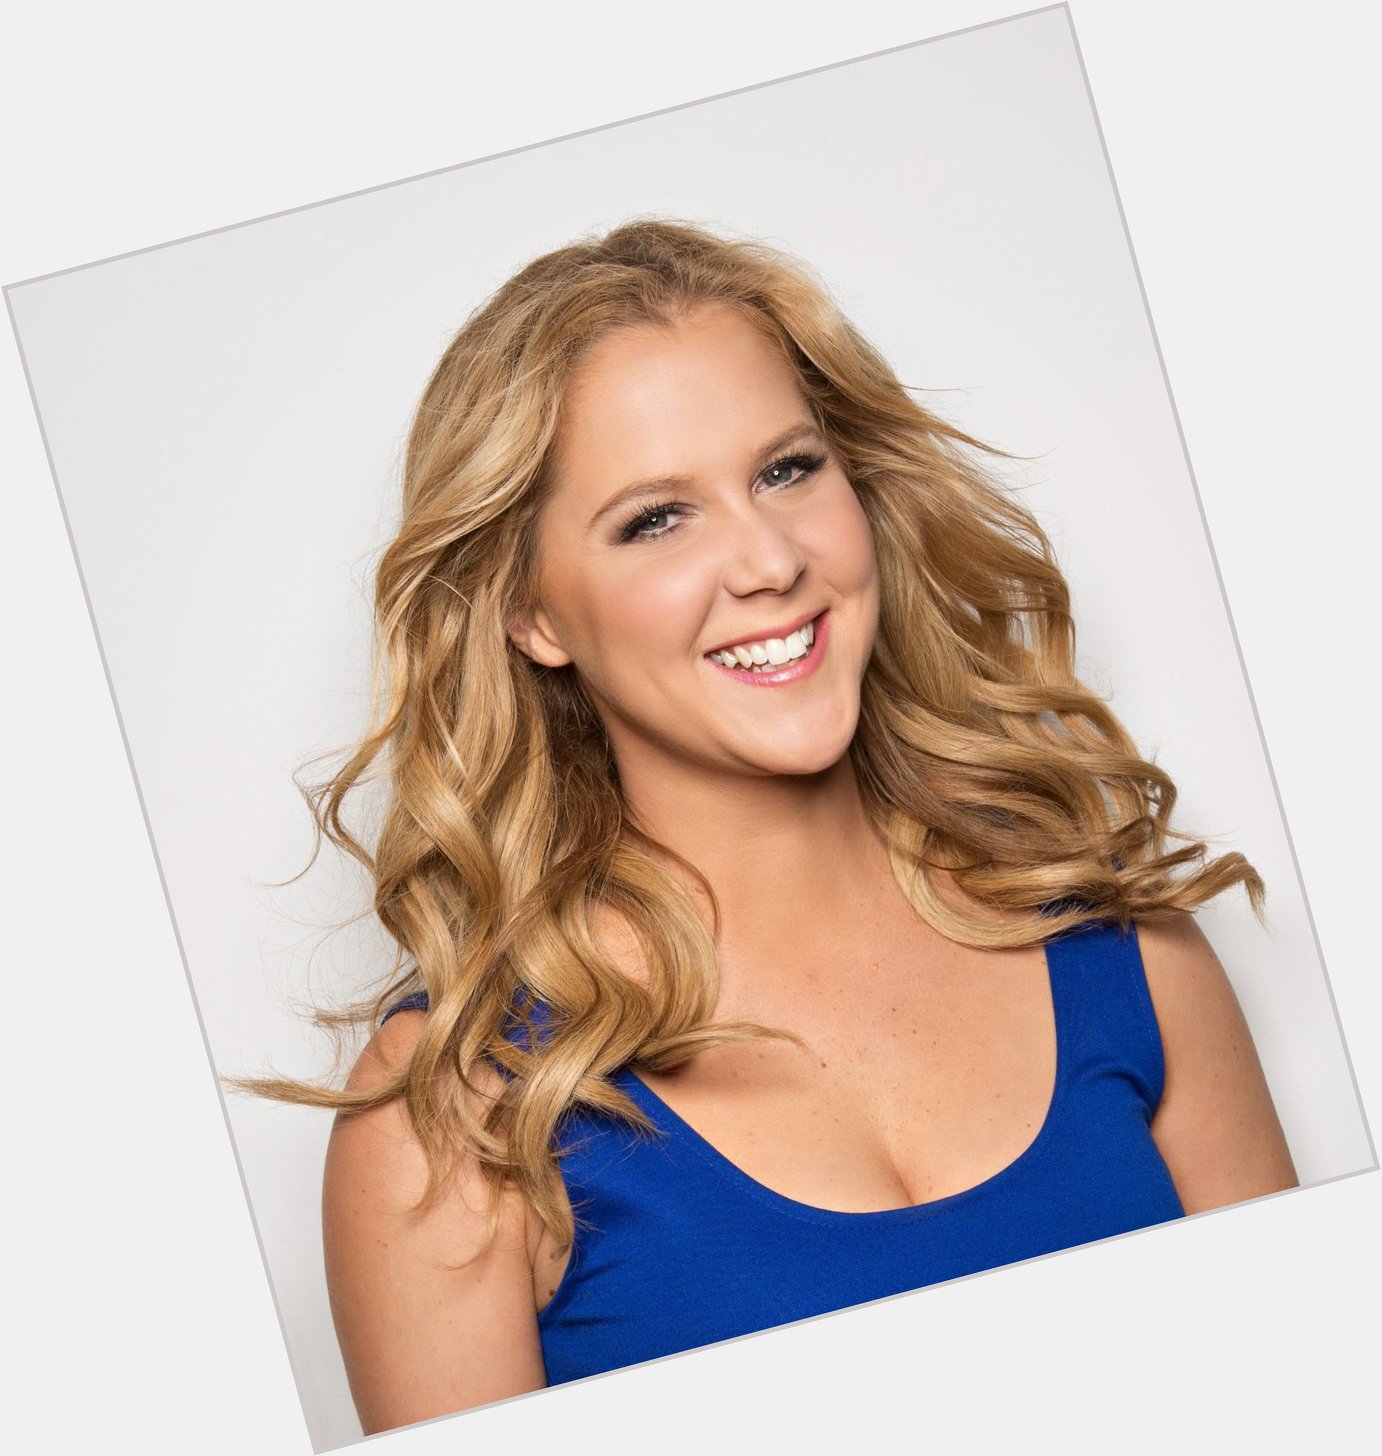 Happy Birthday to the lovely Amy Schumer 